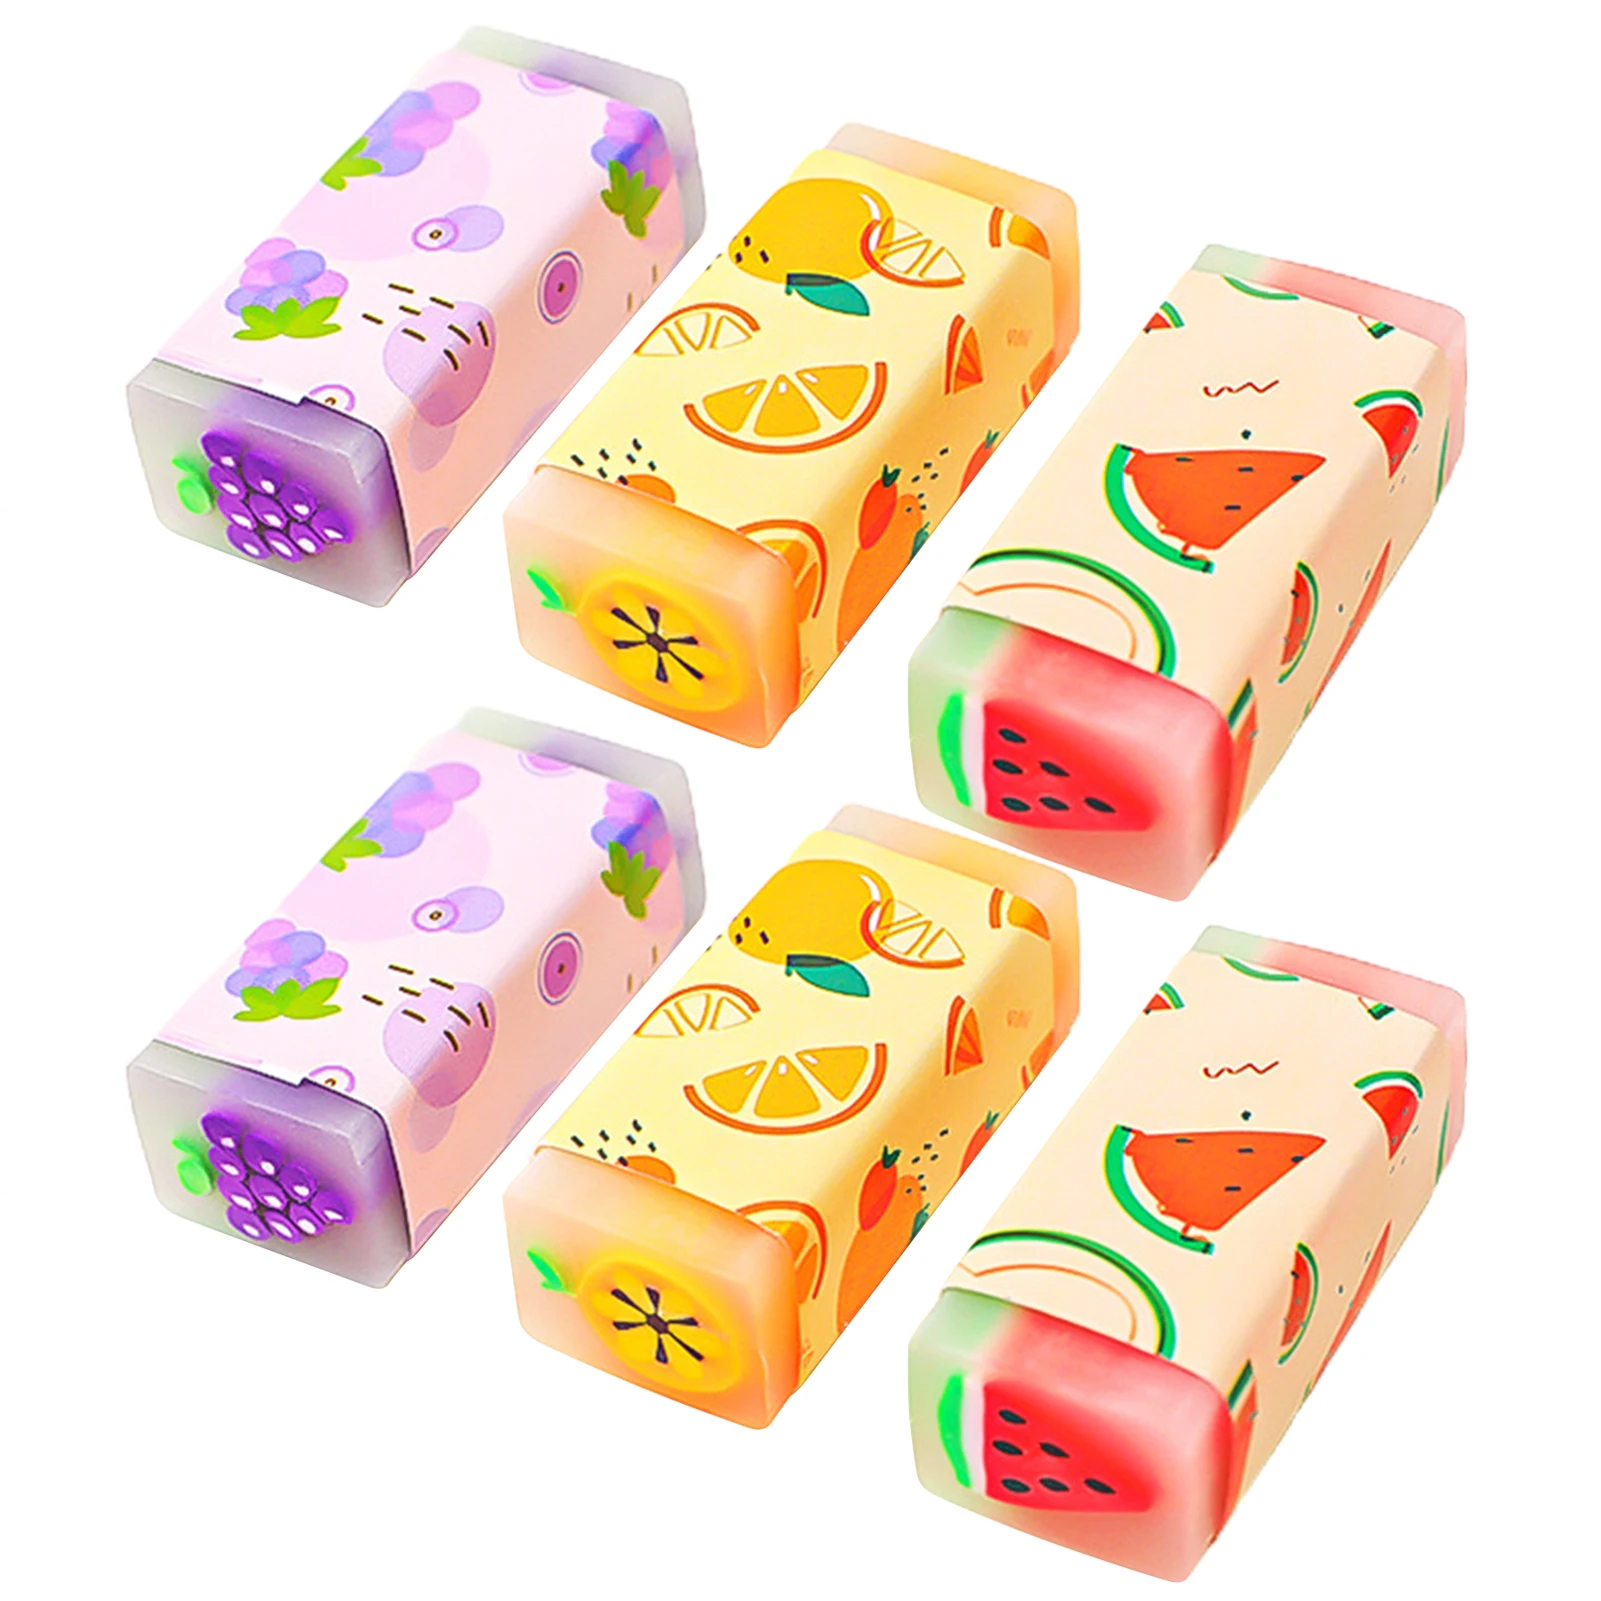 

6pcs Random Style Pencil Eraser Gift Drawing School Students Long Lasting For Kids Party Favors Stationery Cute Fruit Kawaii